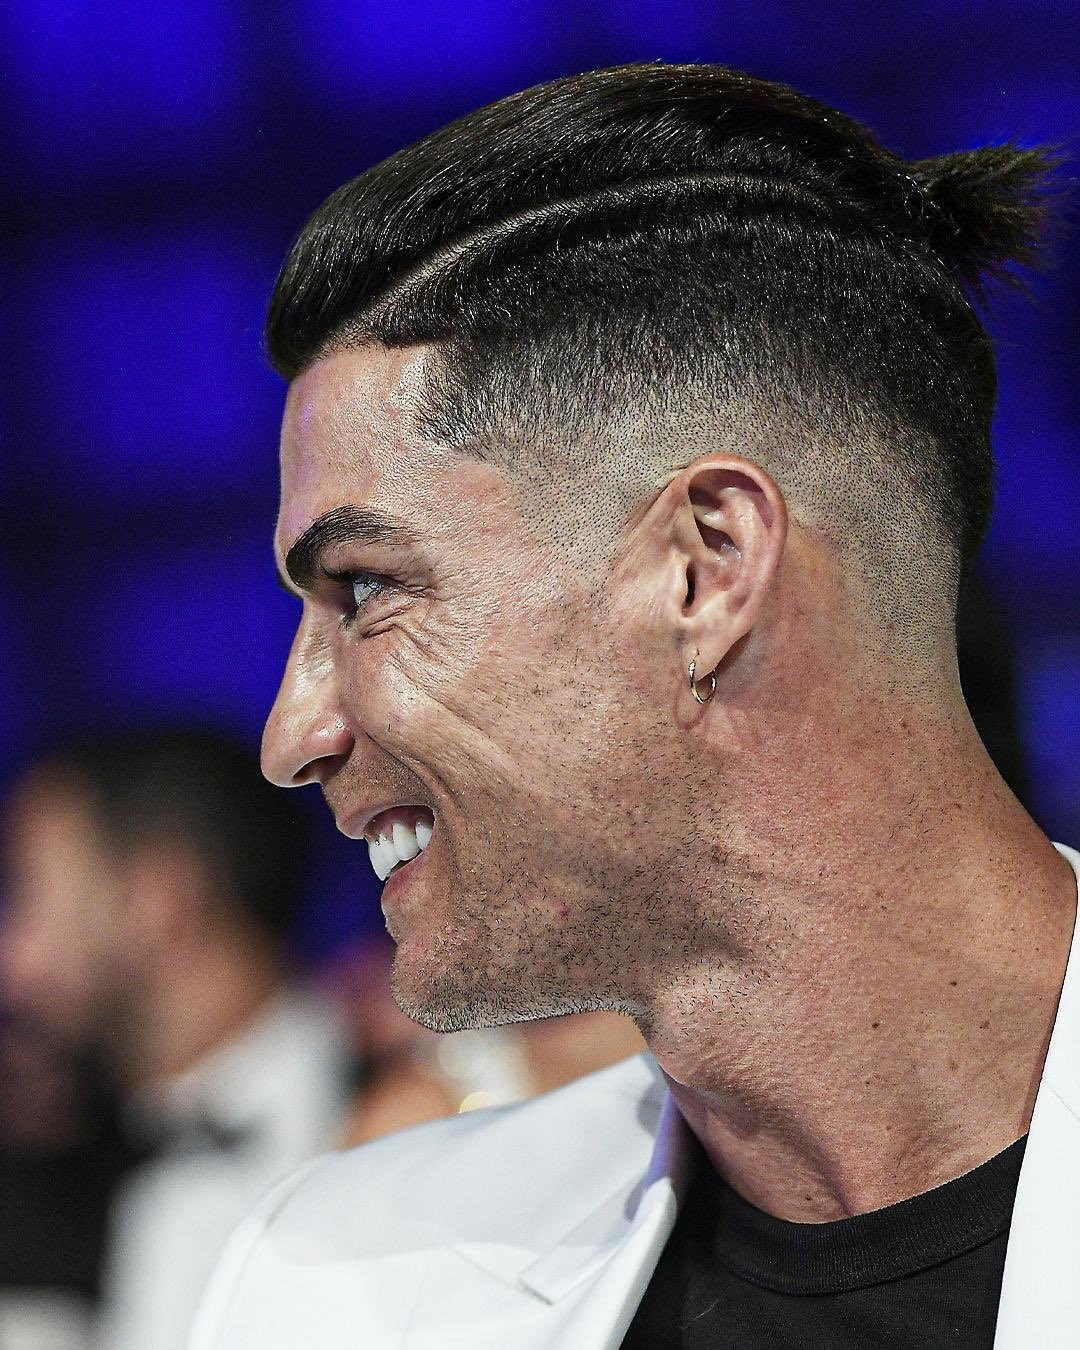 Soccer Legend, Cristiano Ronaldo Shows Off His New Hairstyle (Photo)